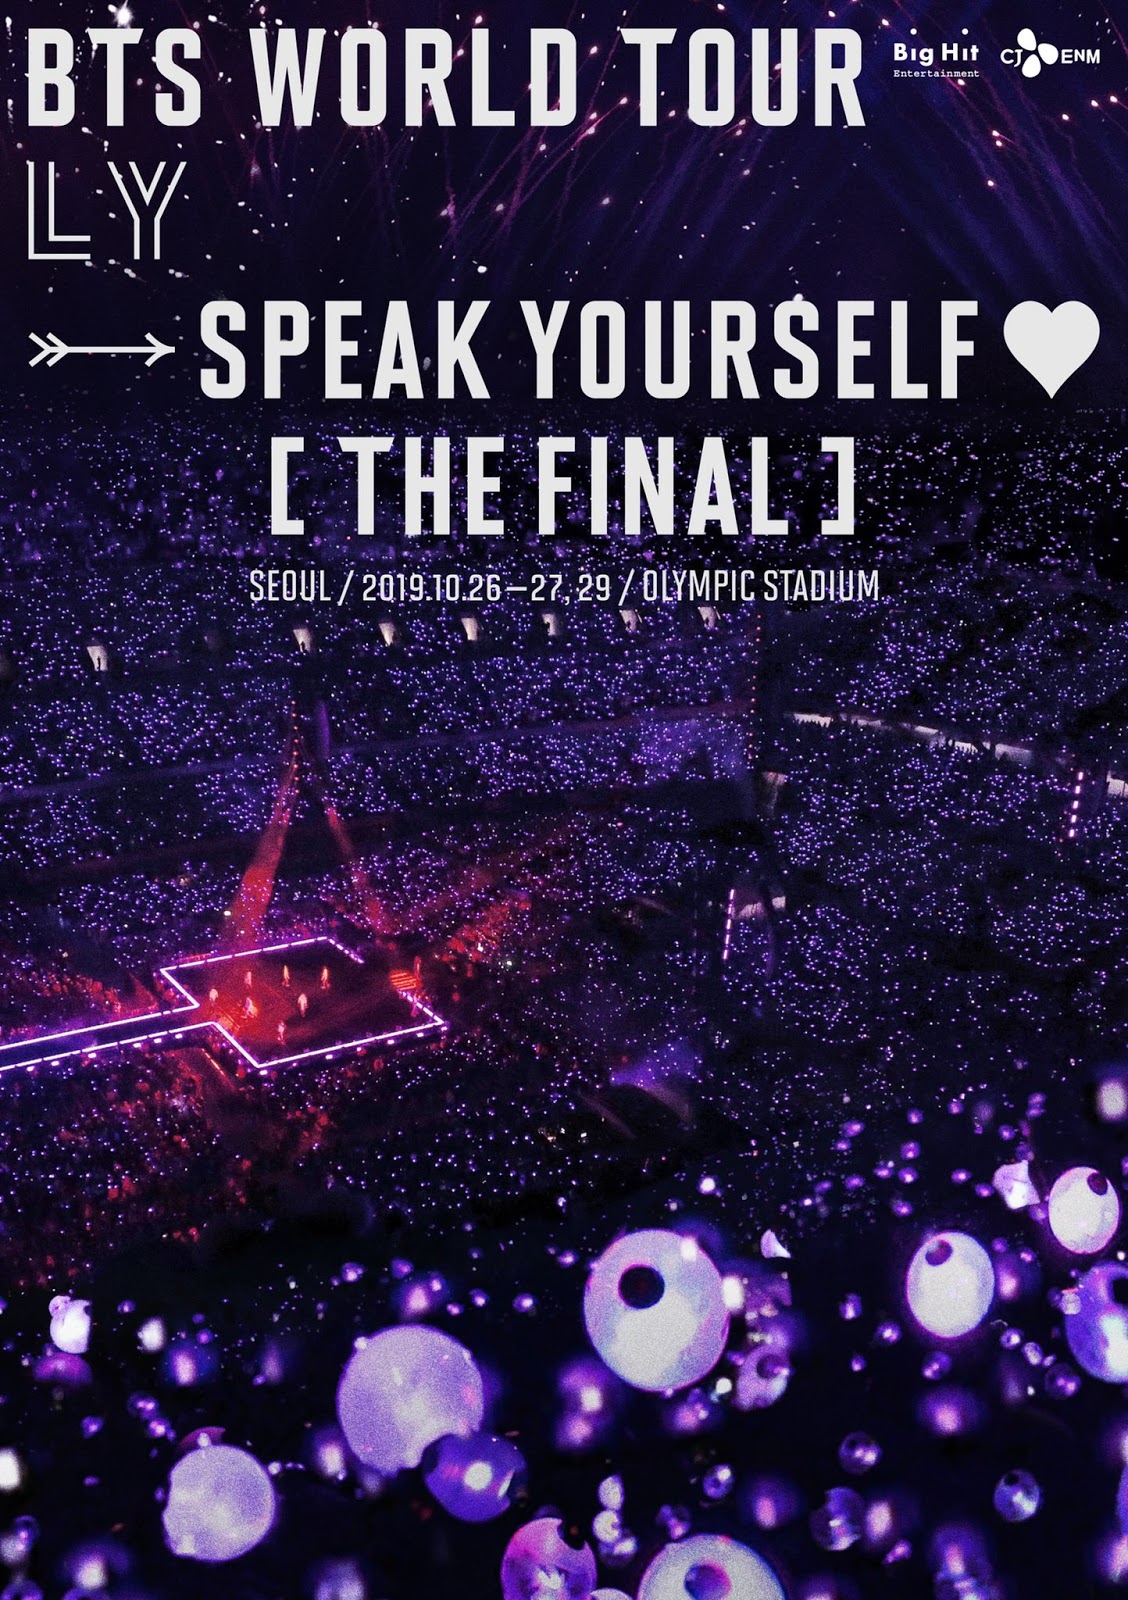 BTS Will Broadcast 'Love Yourself: Speak Yourself' Concert in Seoul Live